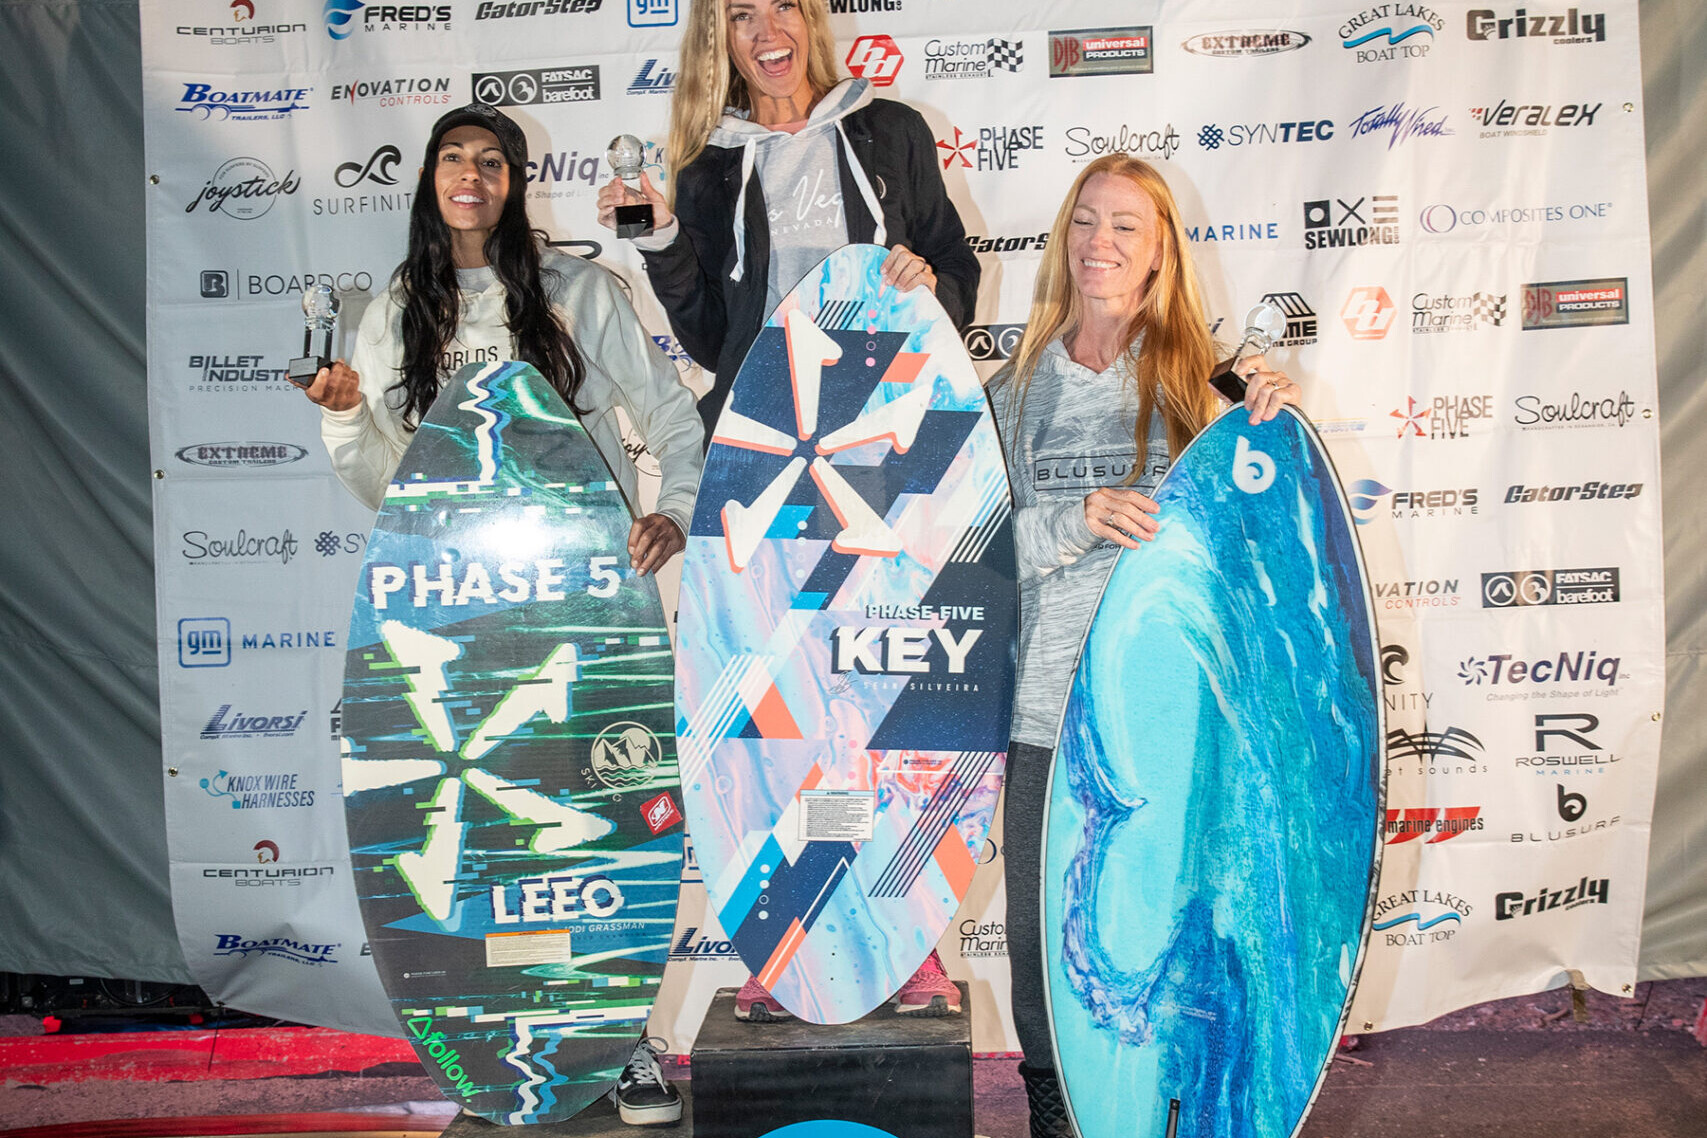 A group of surf competitors posing for a photo with their surfboards.